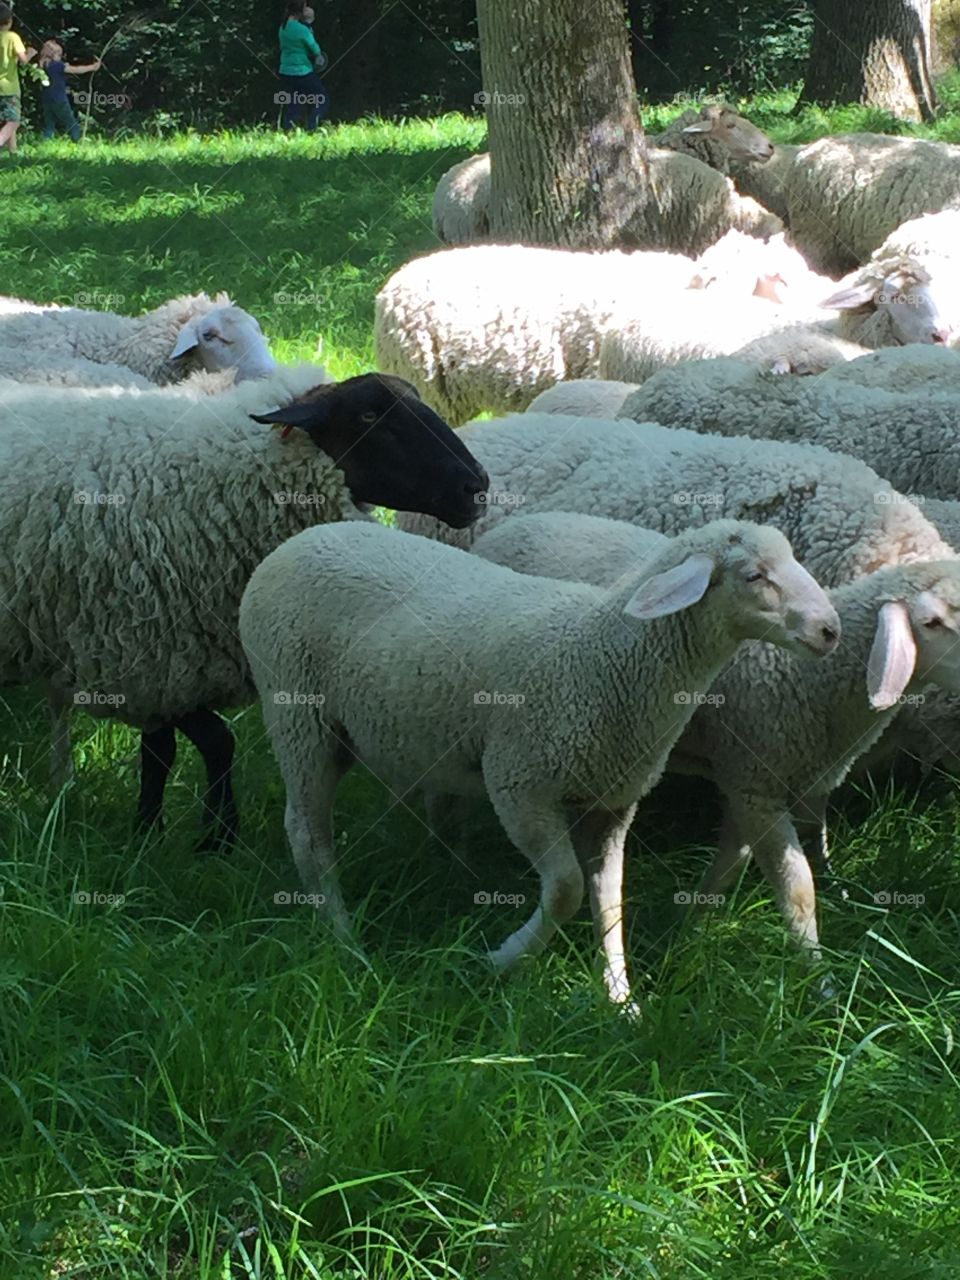 Sweet sheeps in the park